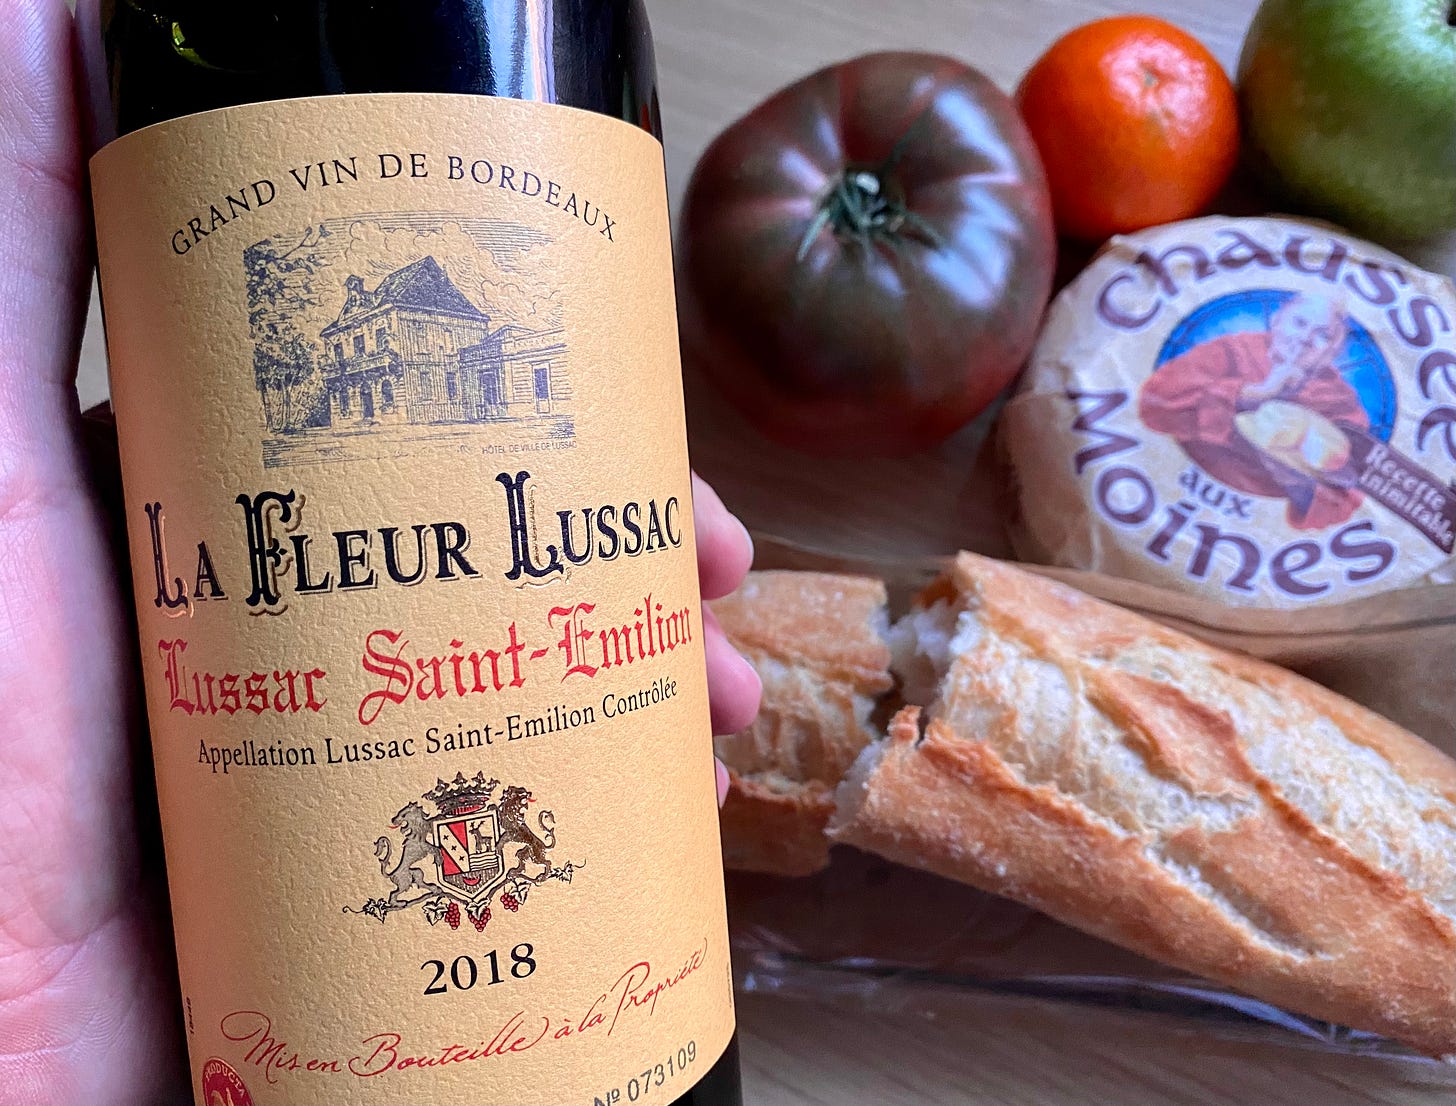 A bottle of La Fleur Lussac Saint emission 2018 red wine in the foreground and a baguette, Chaussee aux Moines cheese and a large beef tomato.